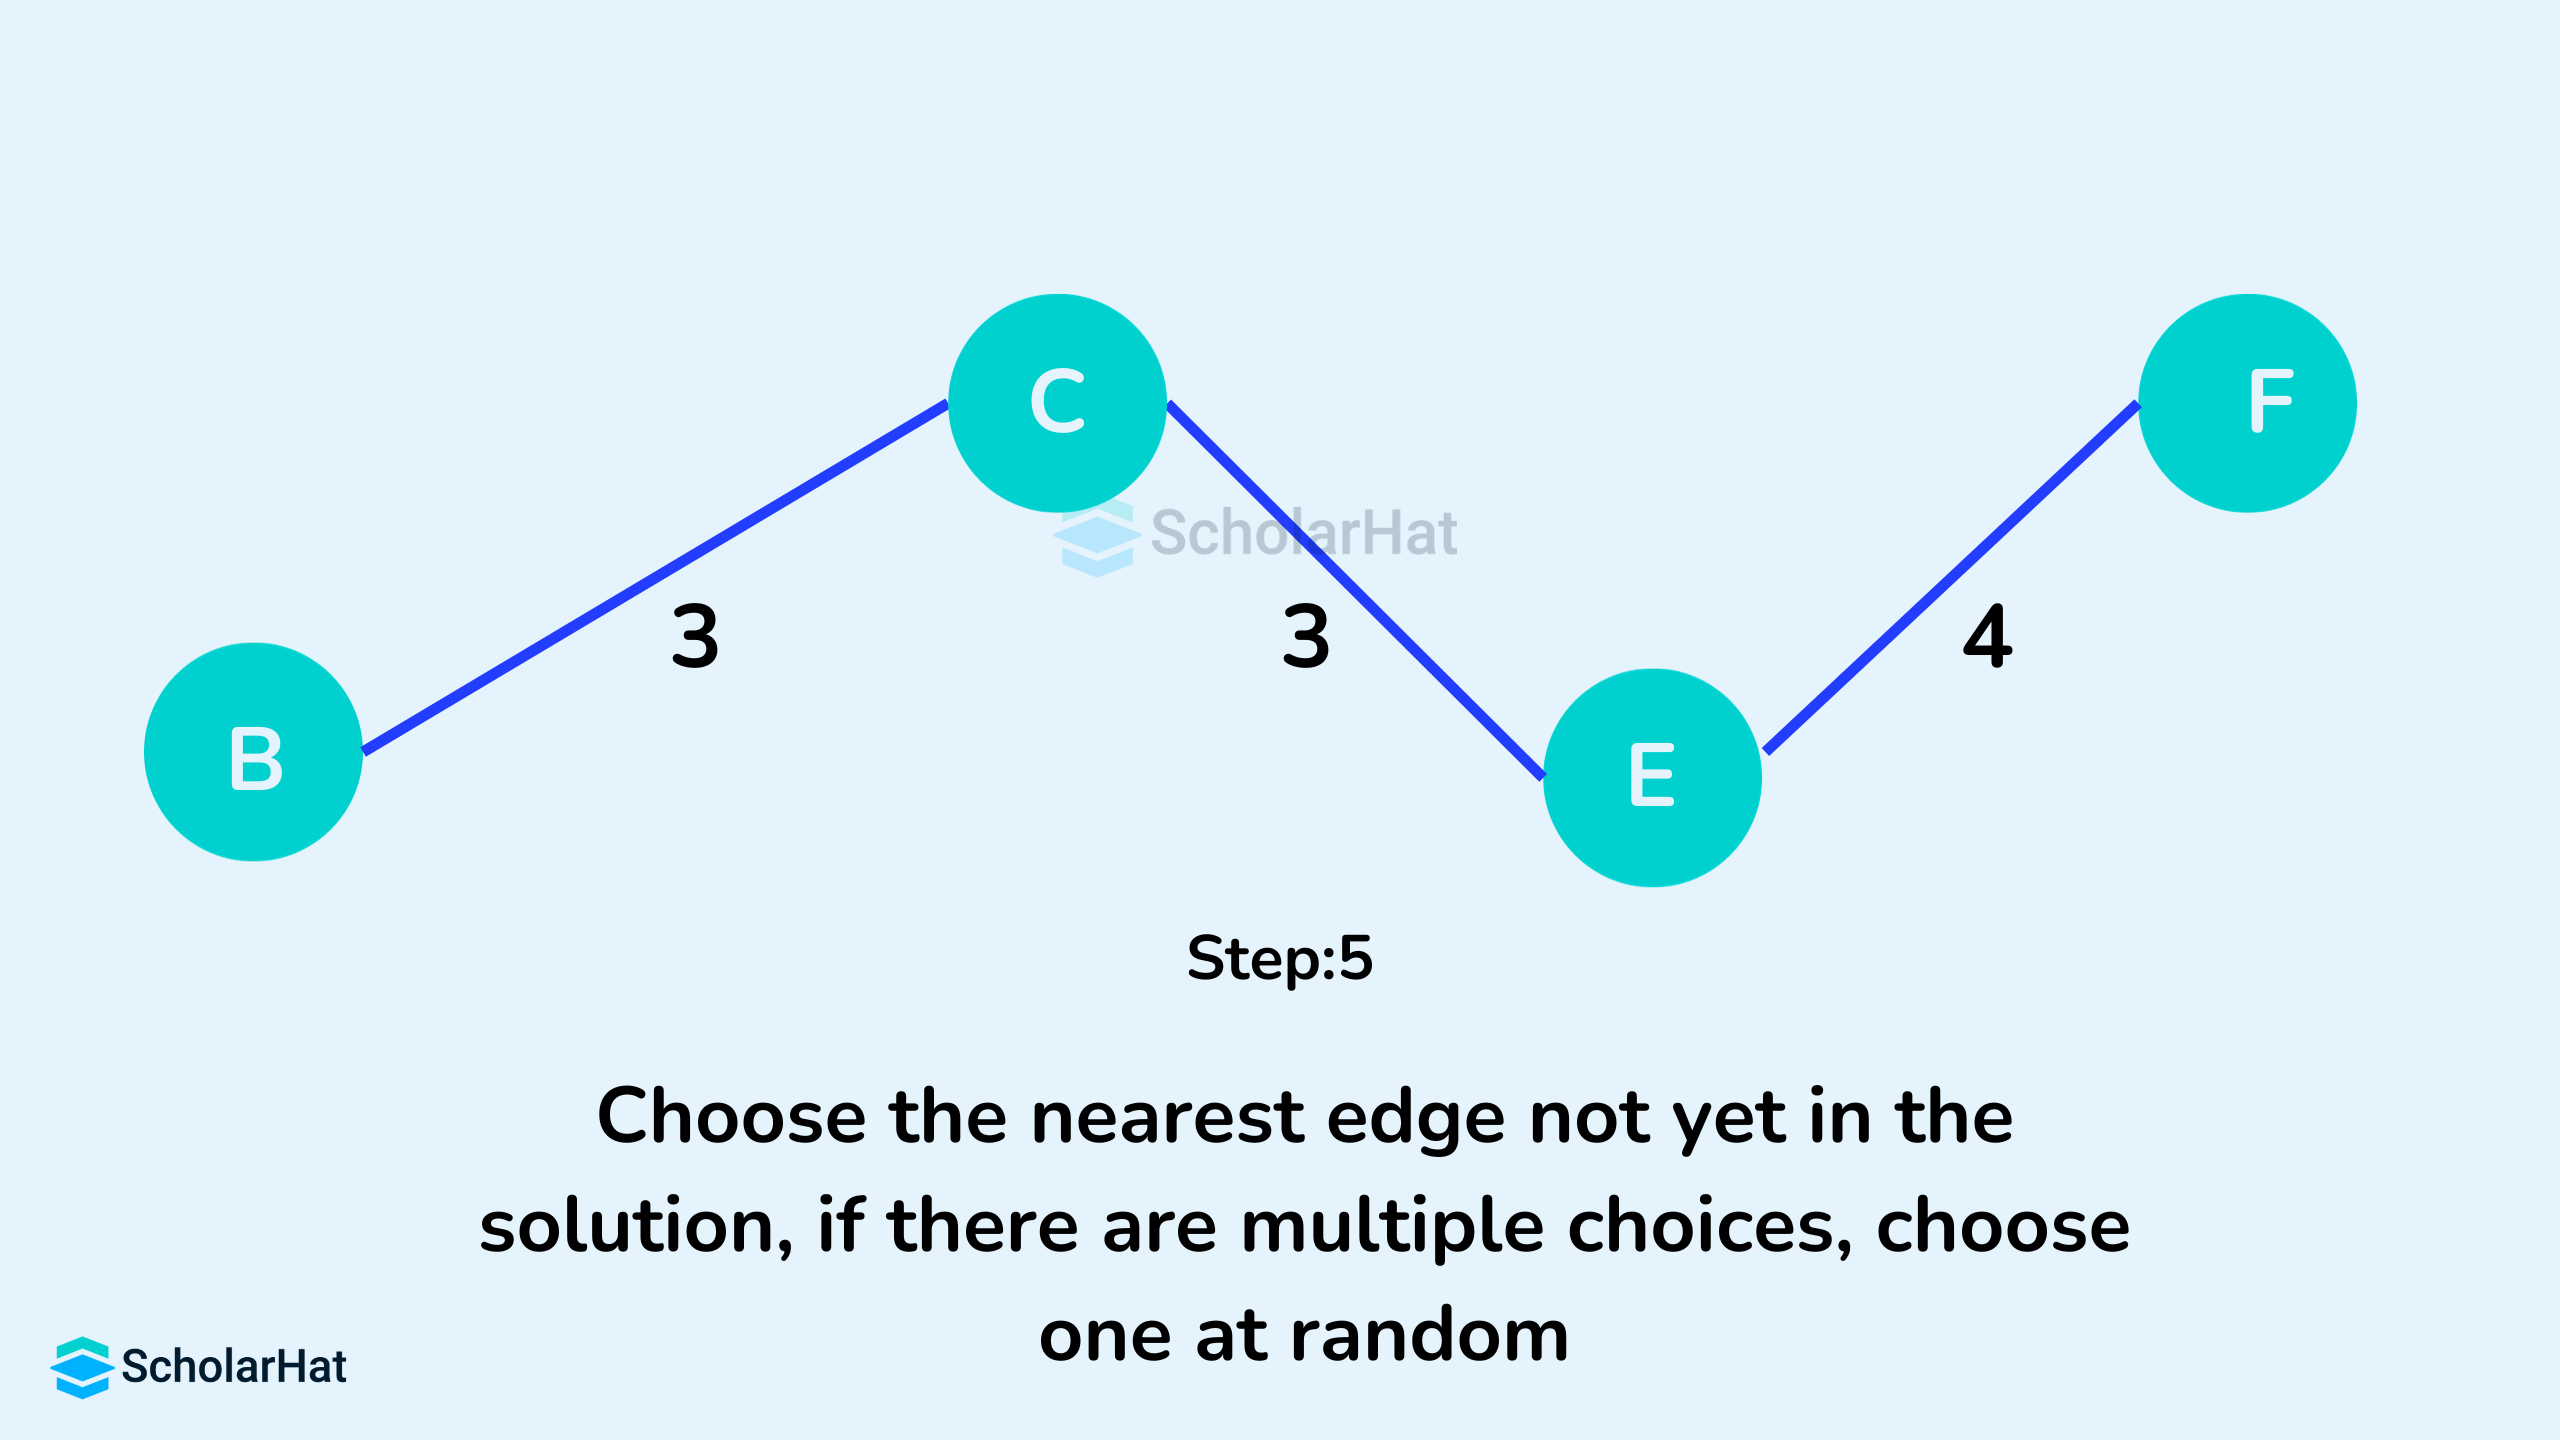 Choose the nearest edge not yet in the solution, if there are multiple choices, choose one at random